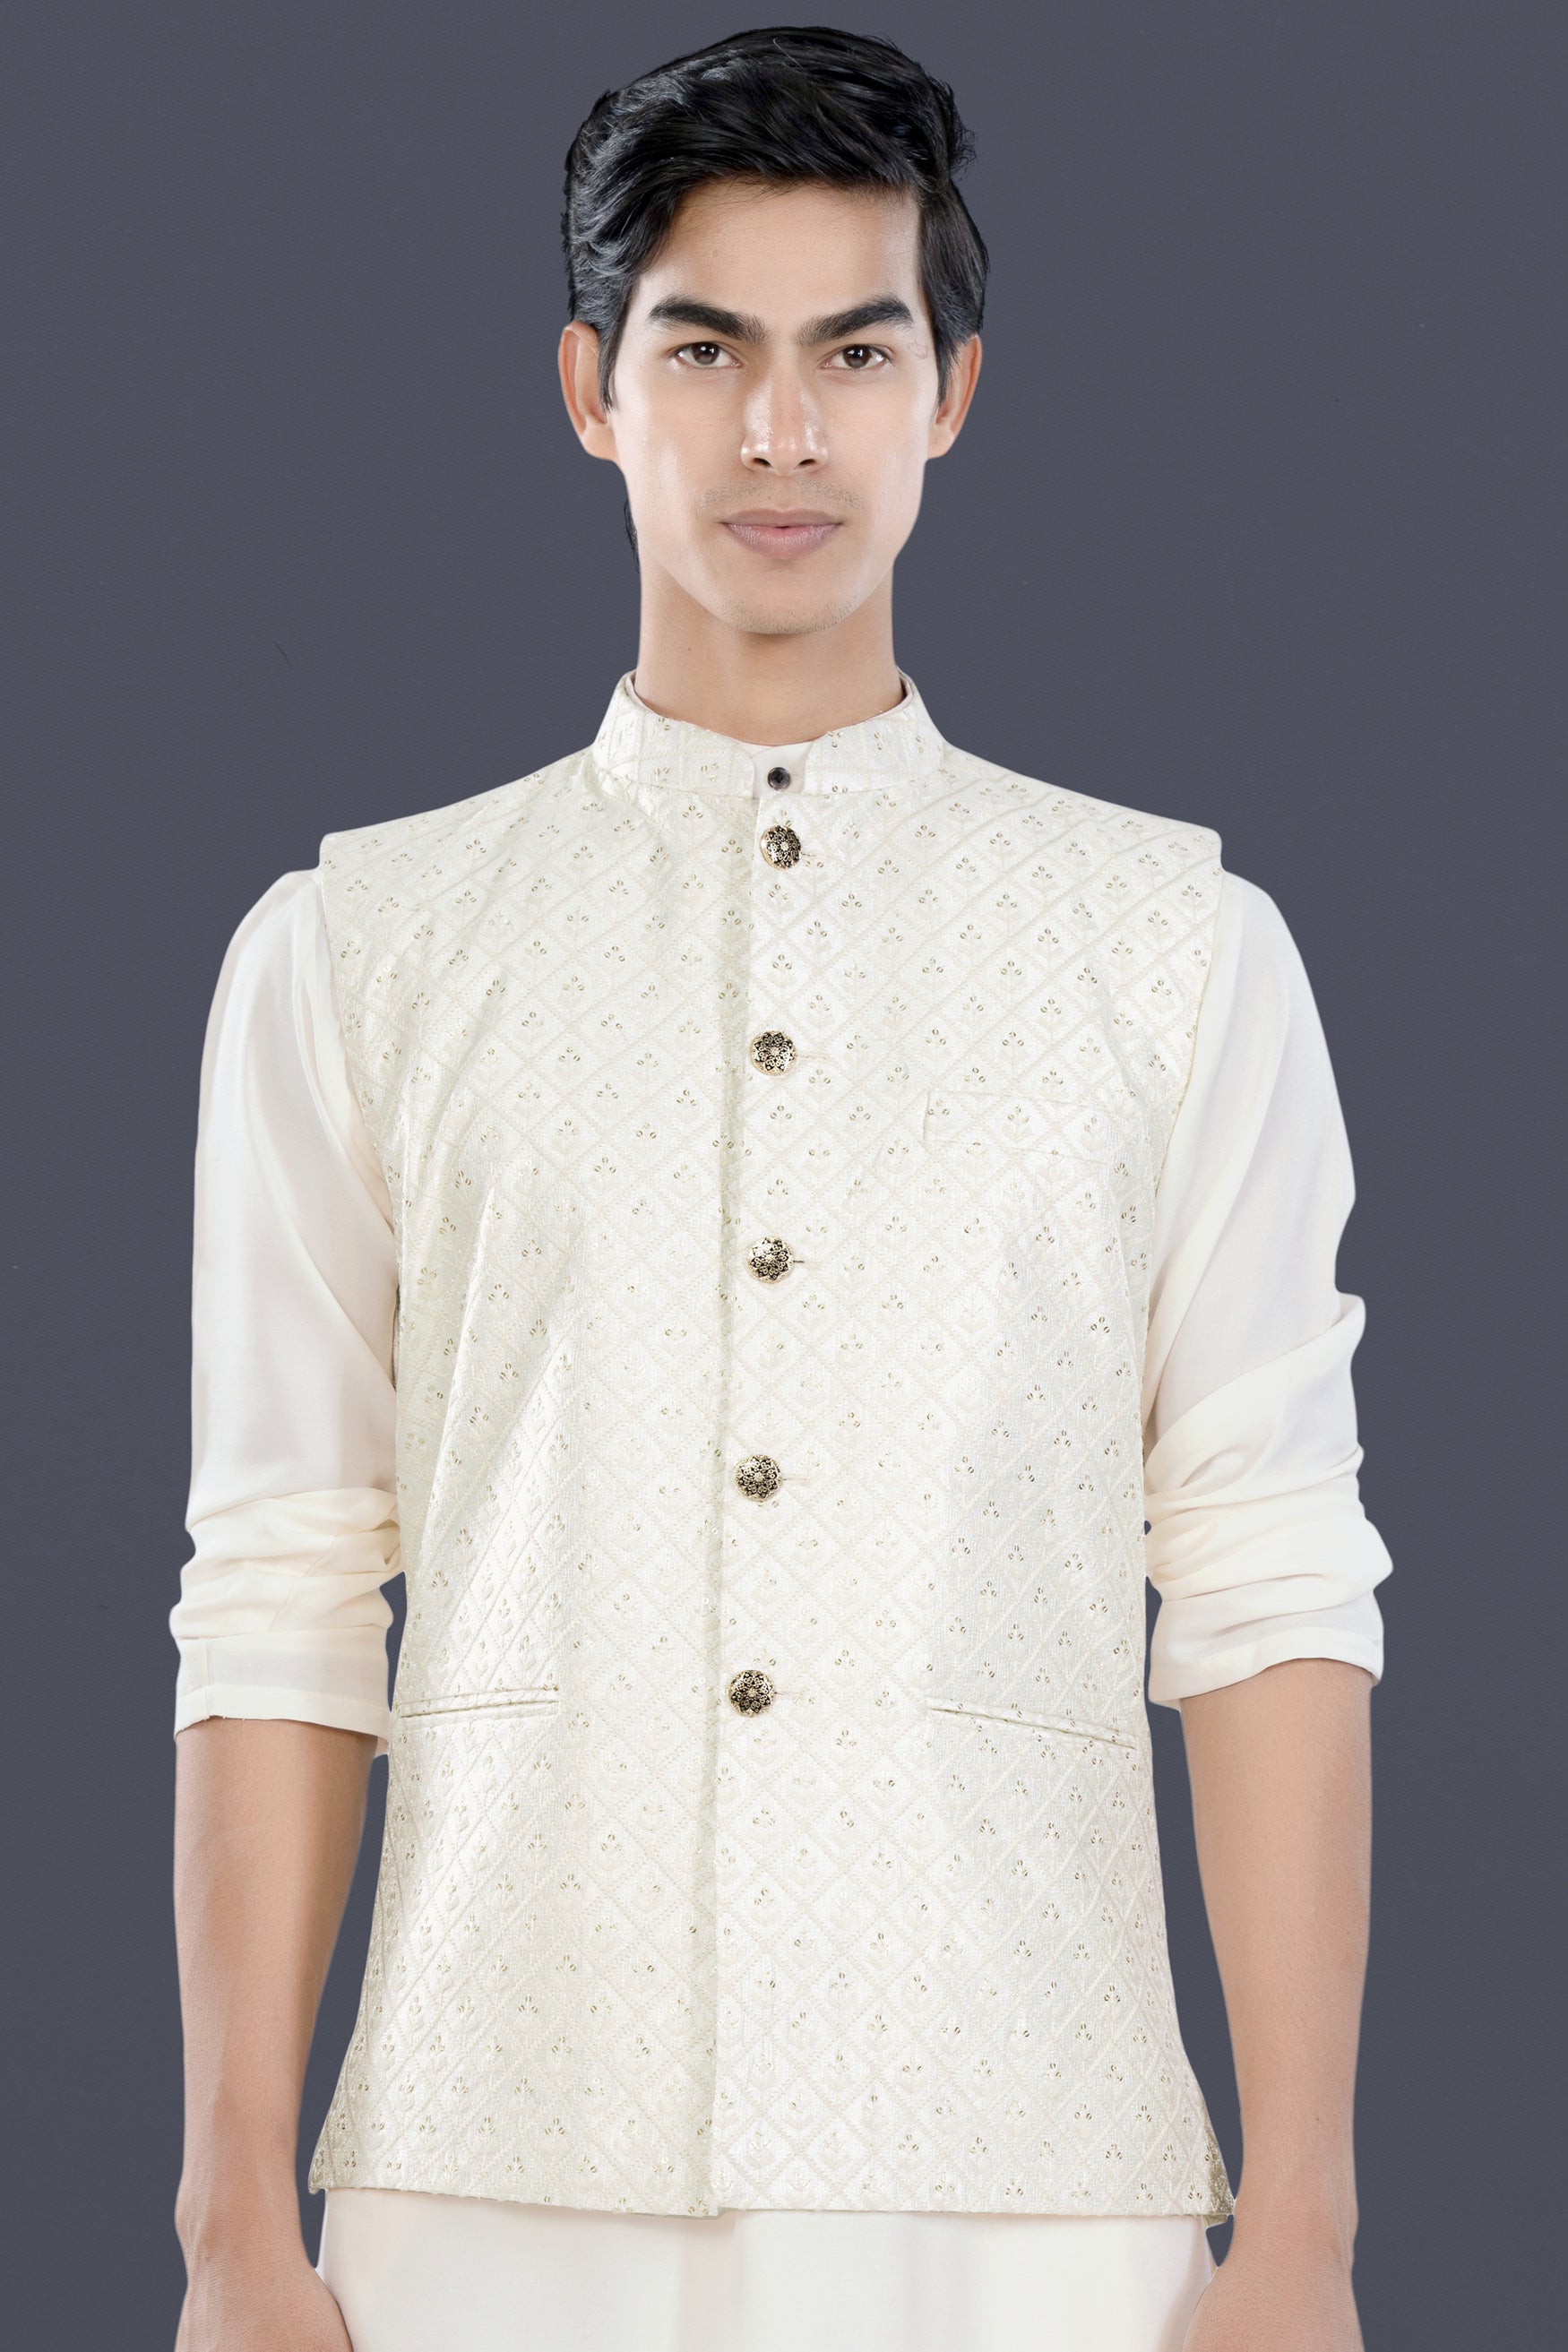 Bright White Trellis Sequin and Thread Embroidered Designer Nehru Jacket WC3474-36,  WC3474-38,  WC3474-40,  WC3474-42,  WC3474-44,  WC3474-46,  WC3474-48,  WC3474-50,  WC3474-52,  WC3474-54,  WC3474-56,  WC3474-58,  WC3474-60